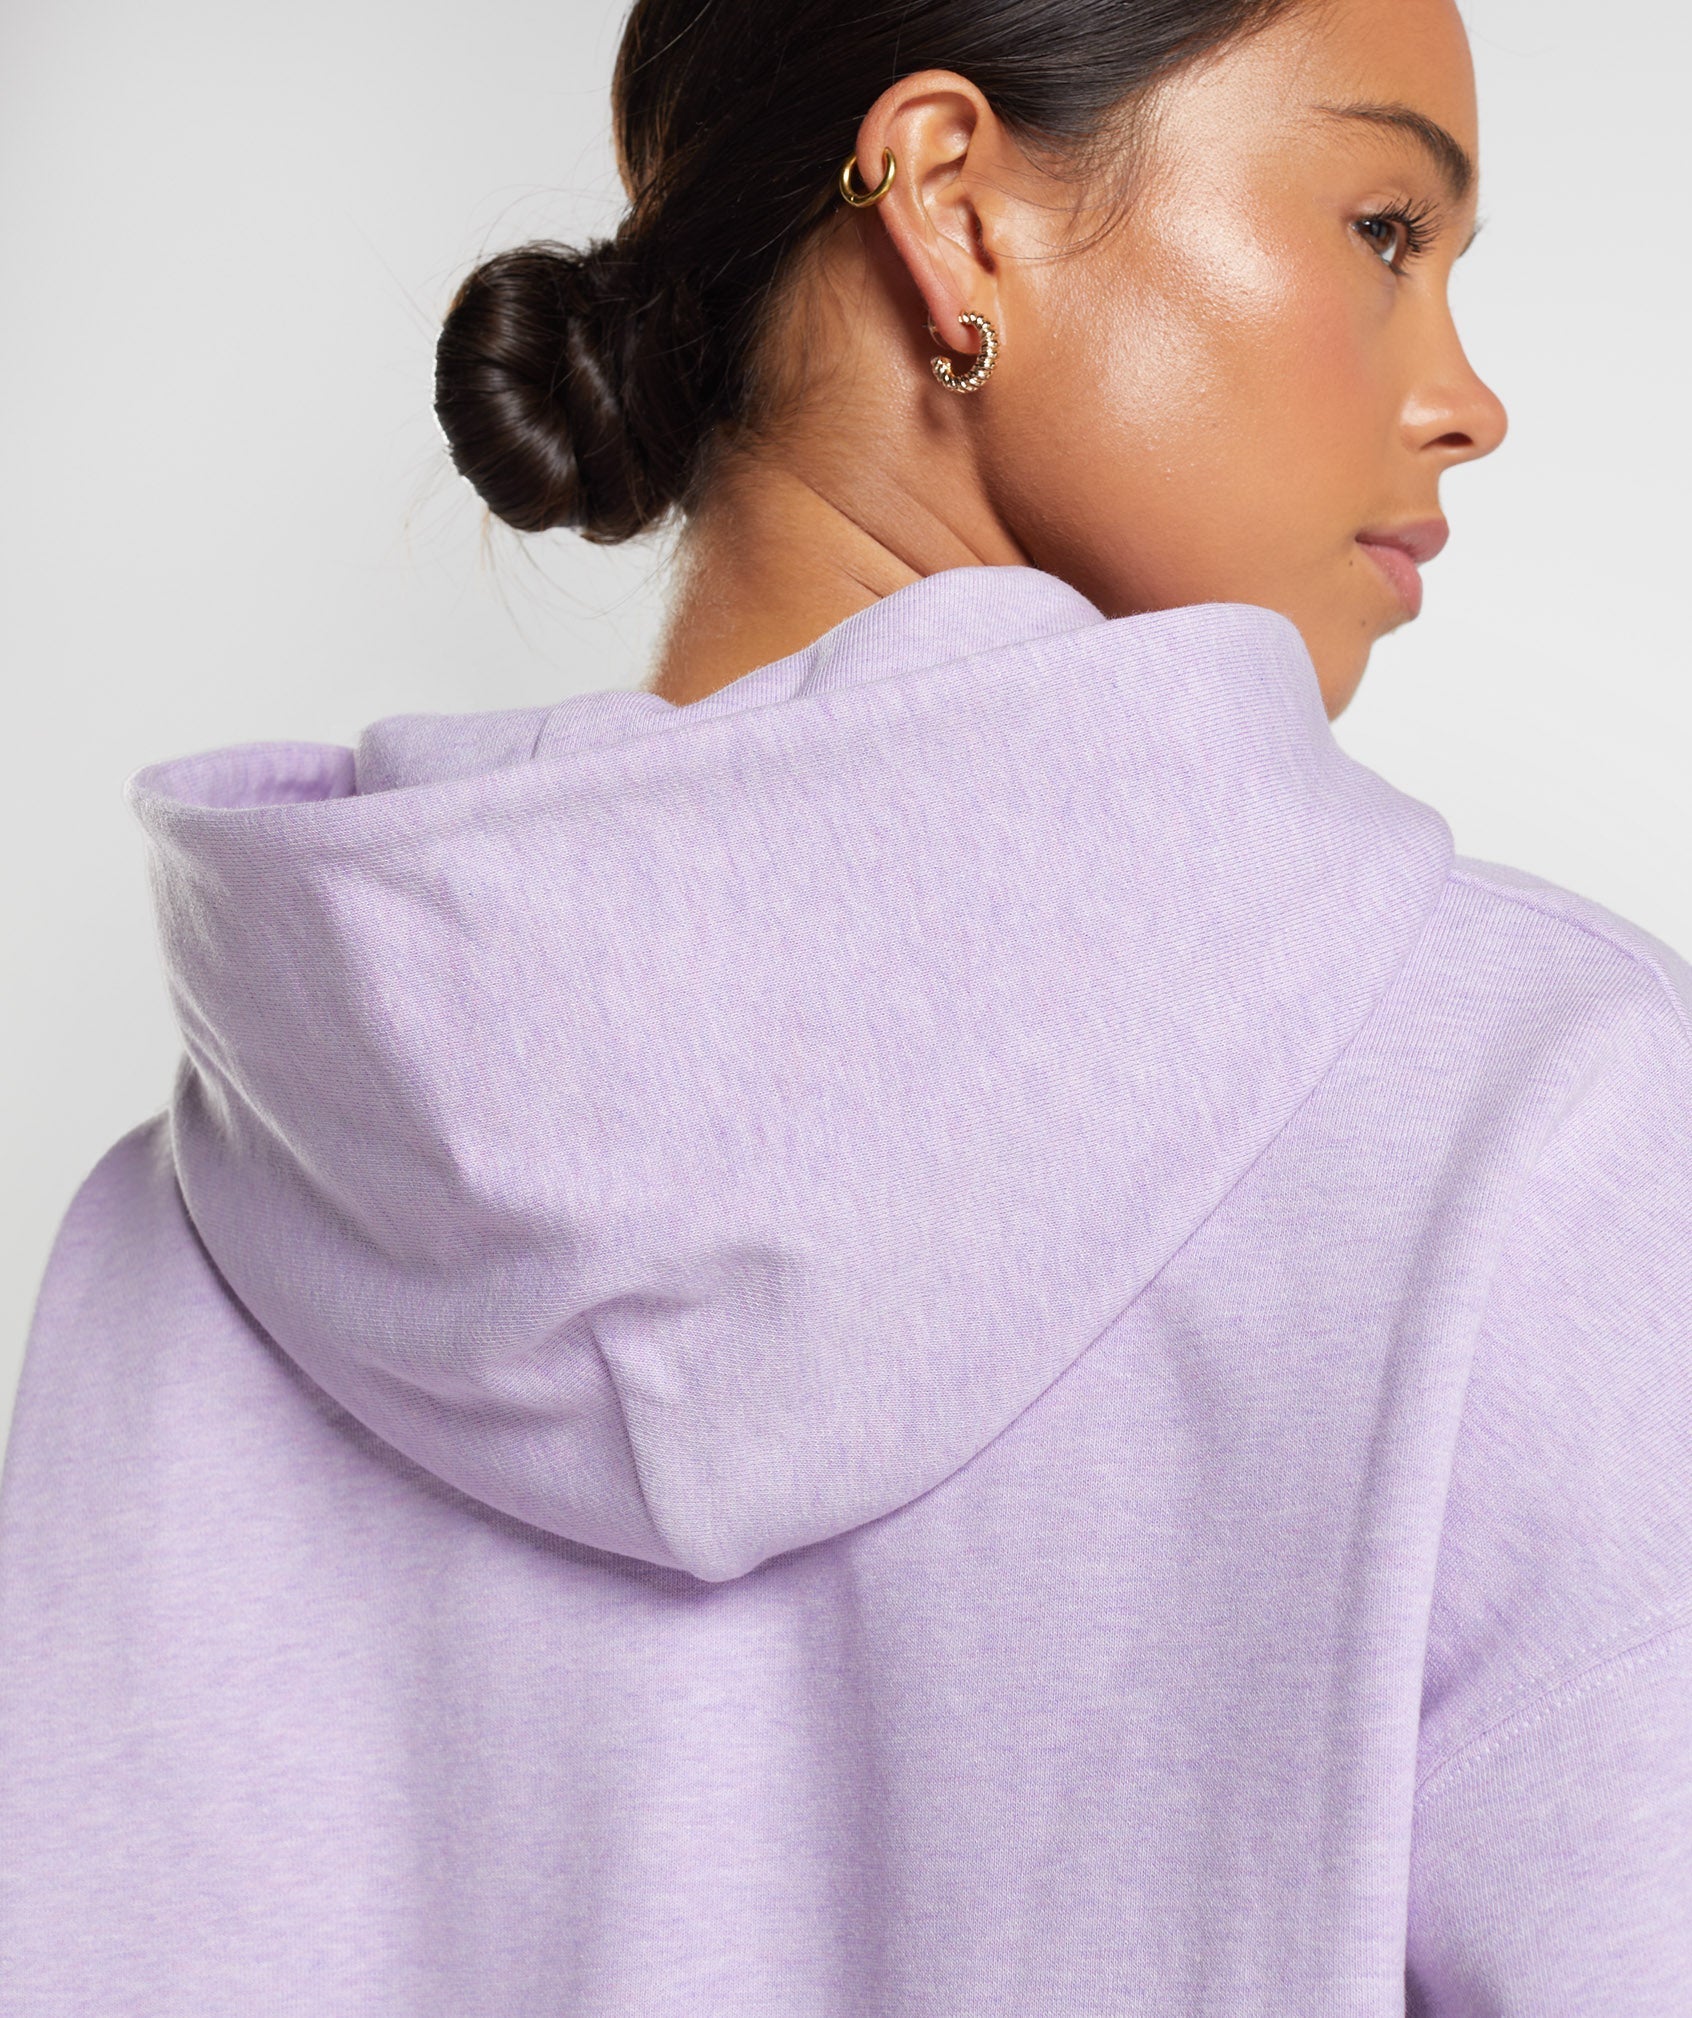 Rest Day Sweats Hoodie in Aura Lilac Marl - view 4